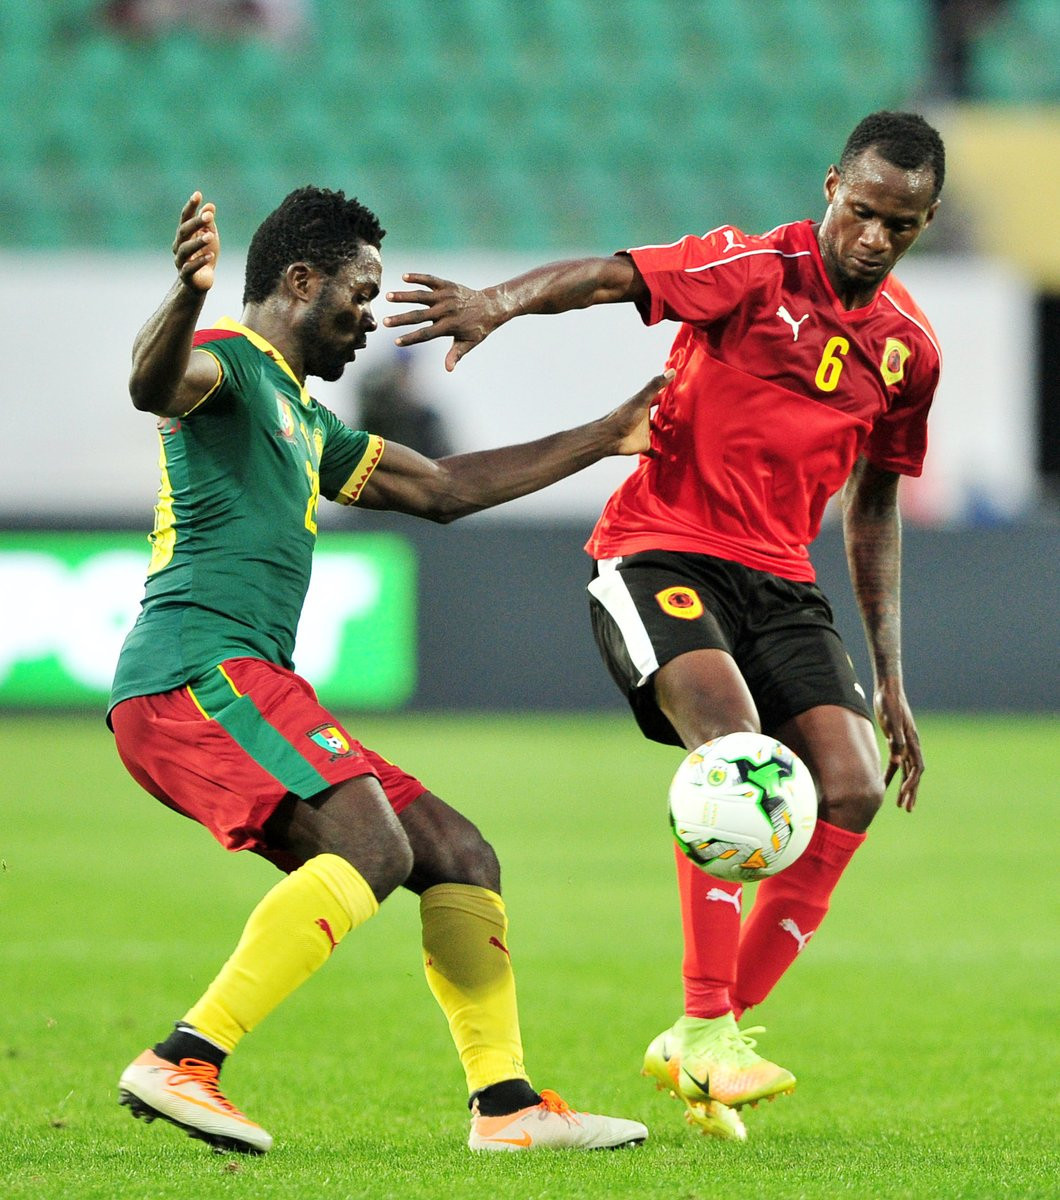 Angola make stride towards confirming place in knockout round at African Nations Championship